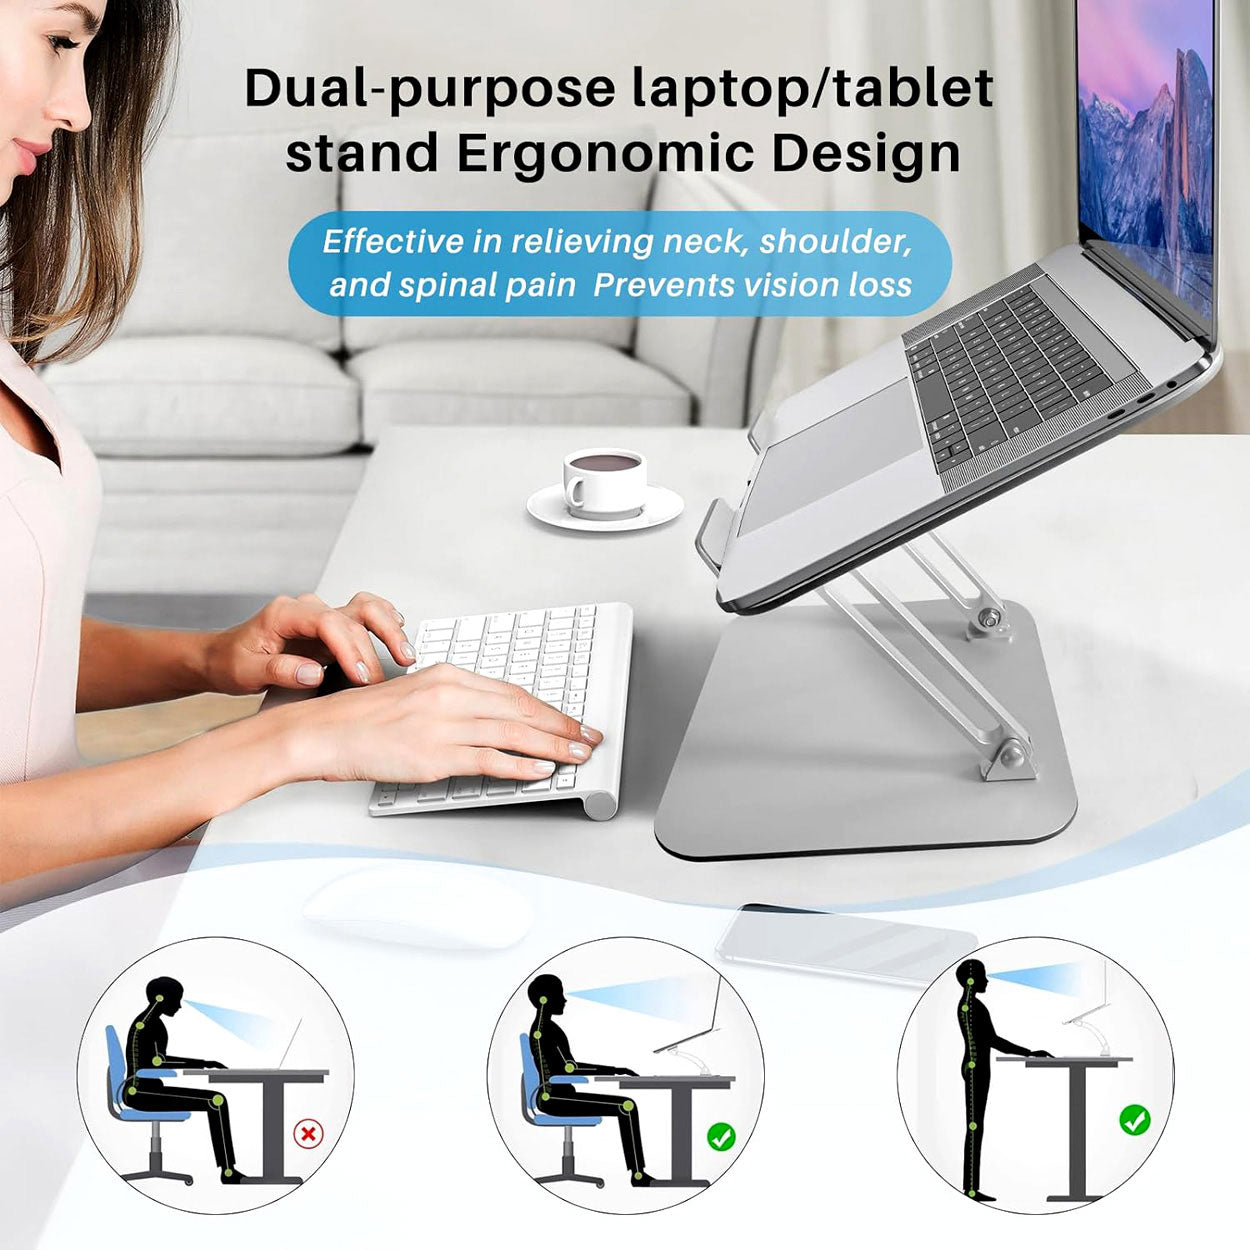 Ergonomic Laptop Stand with Adjustable Height - 2